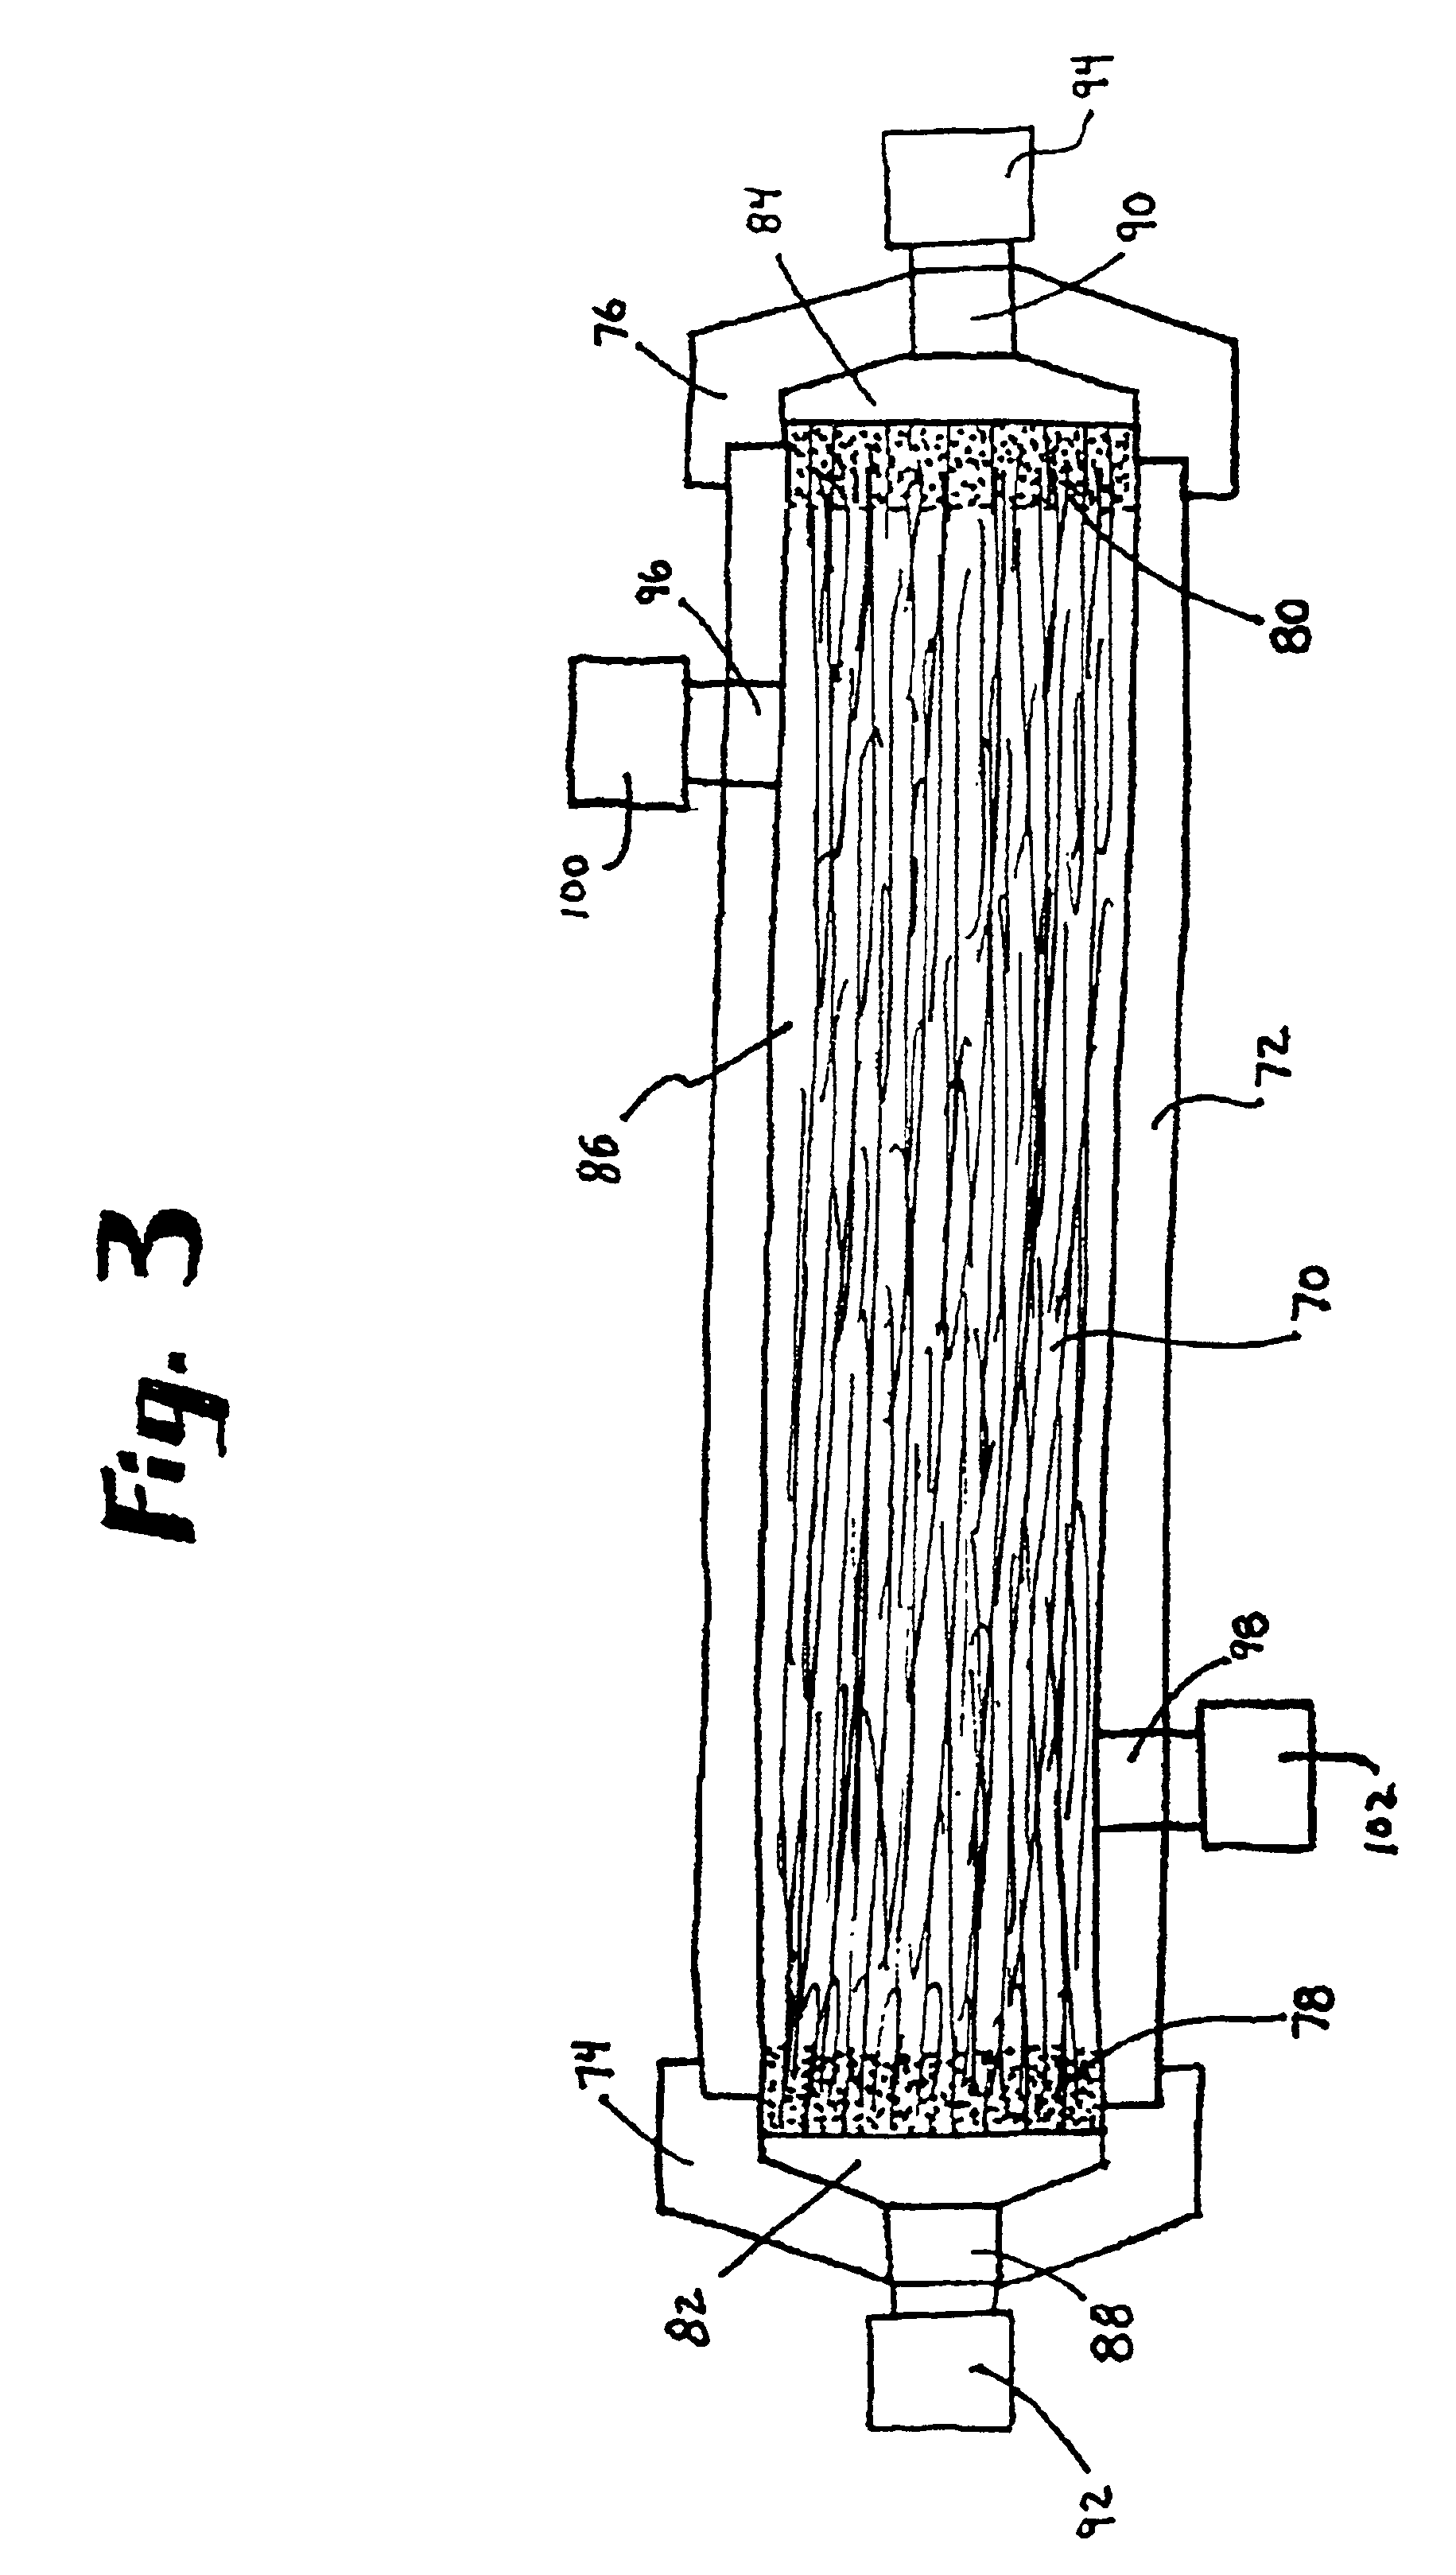 Method of forming gas-enriched fluid